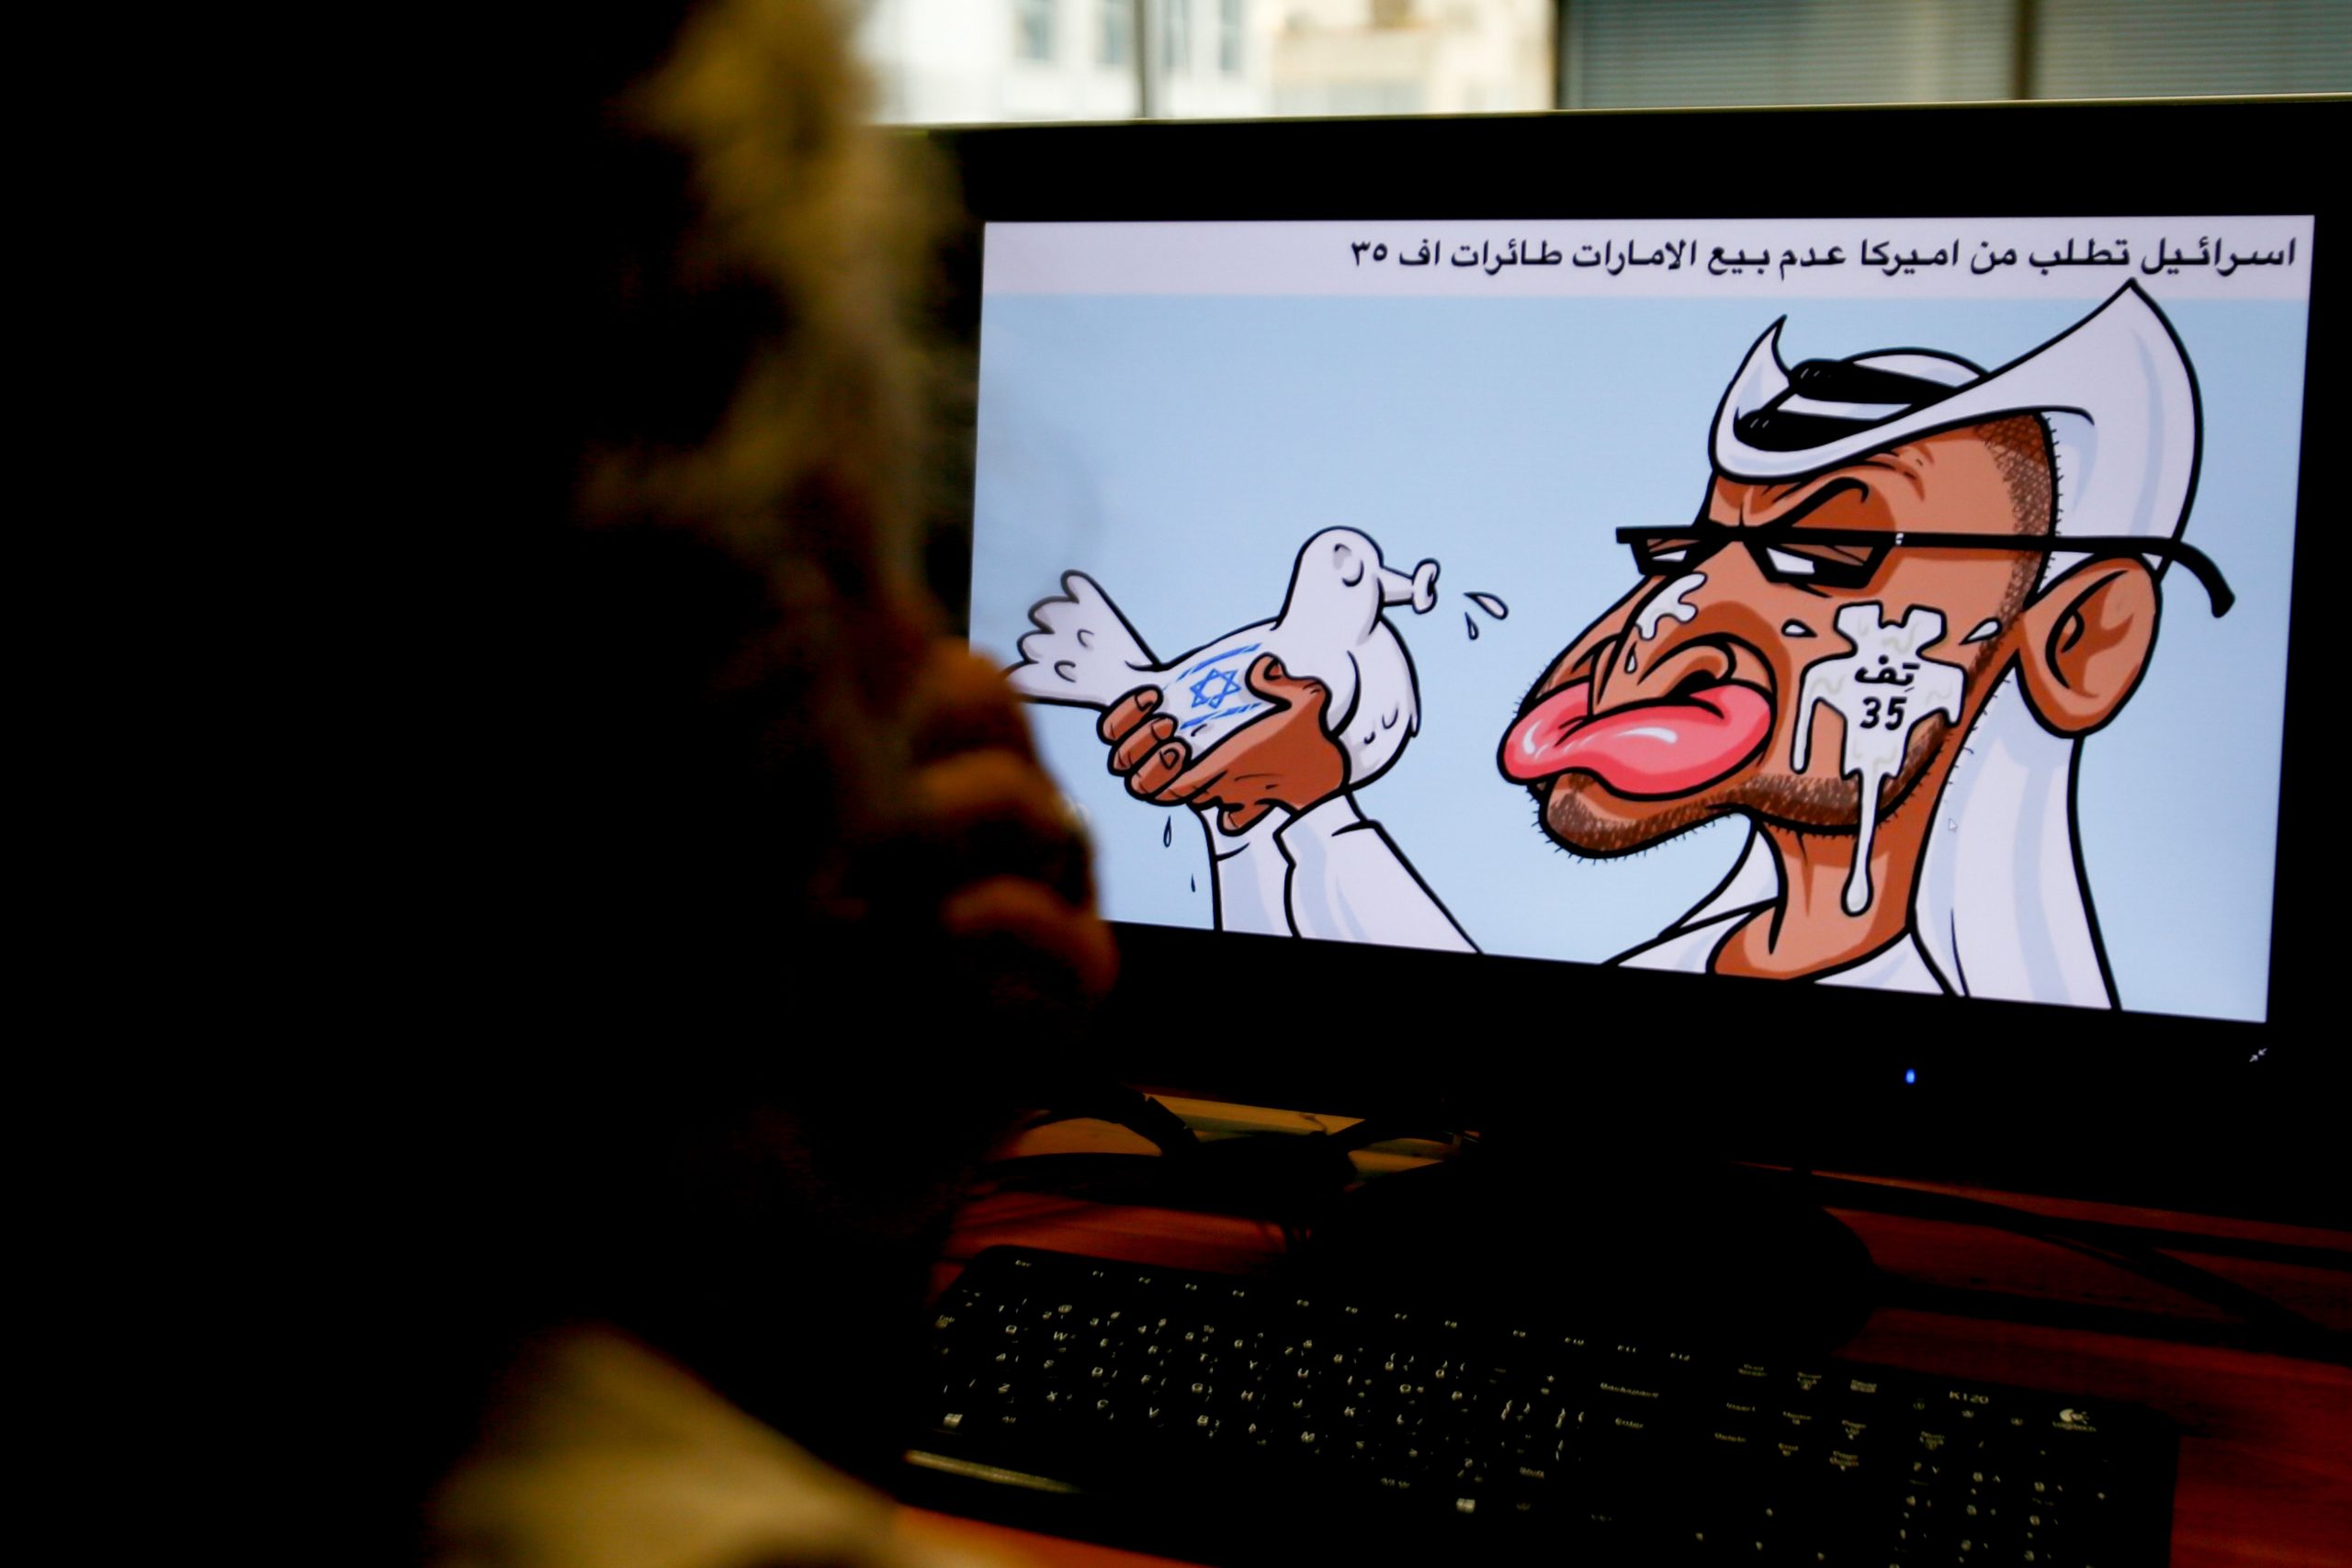 That the arrest of a prominent Jordanian cartoonist says about the state of satire in the Arab world